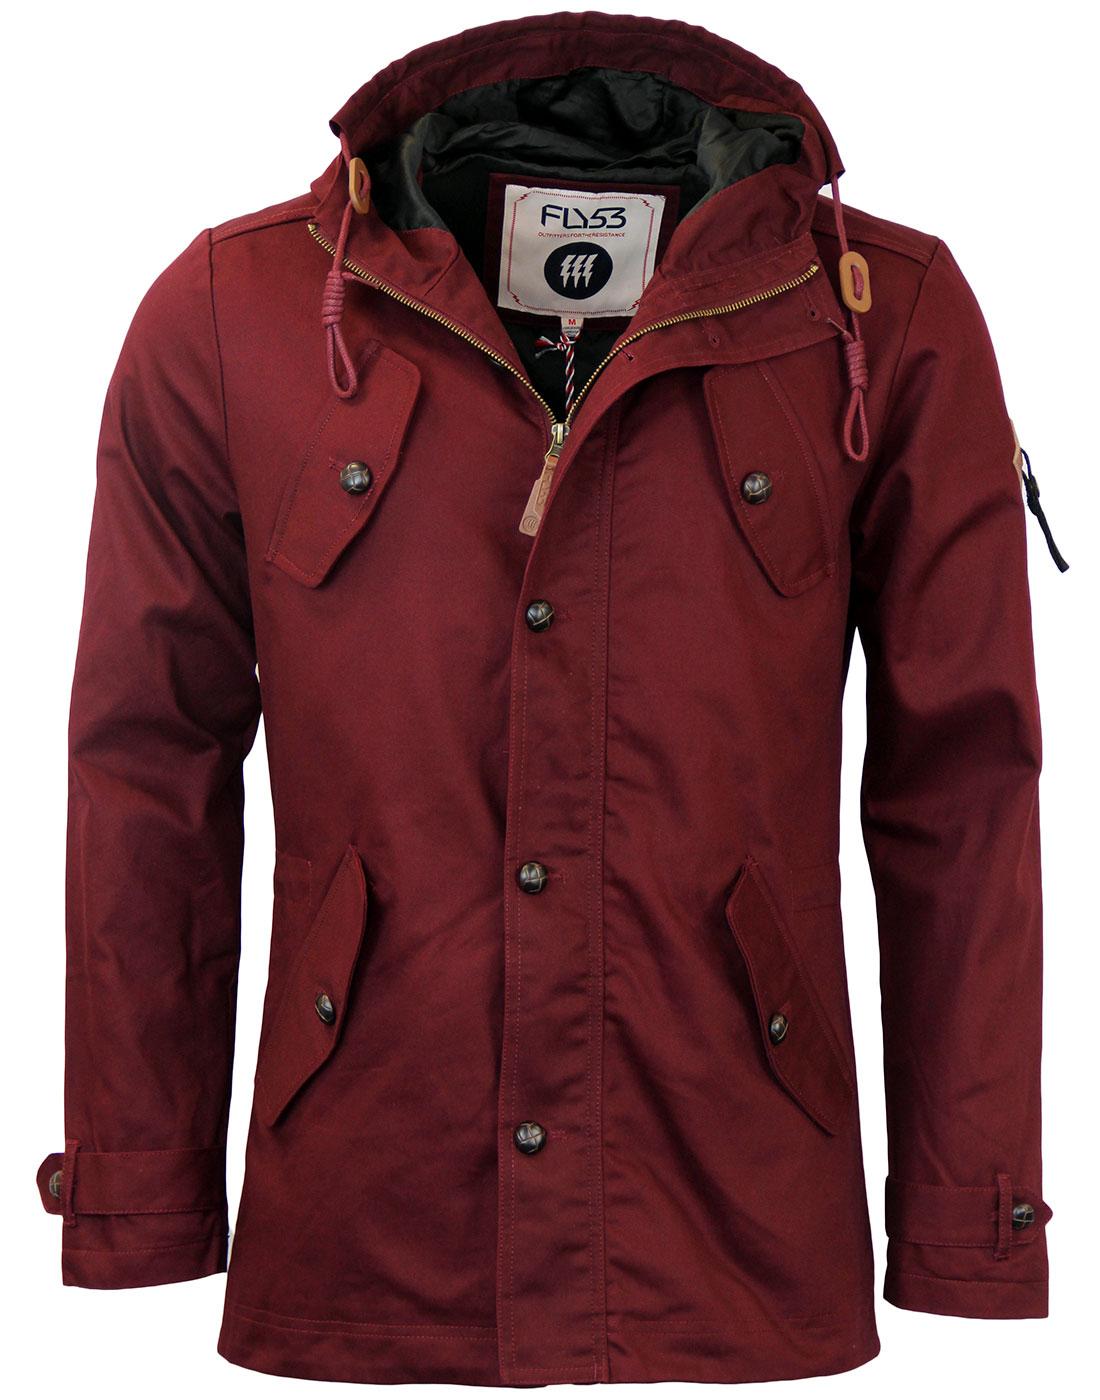 FLY53 Burton Retro Indie Mod Military Fishtail Parka in Oxblood